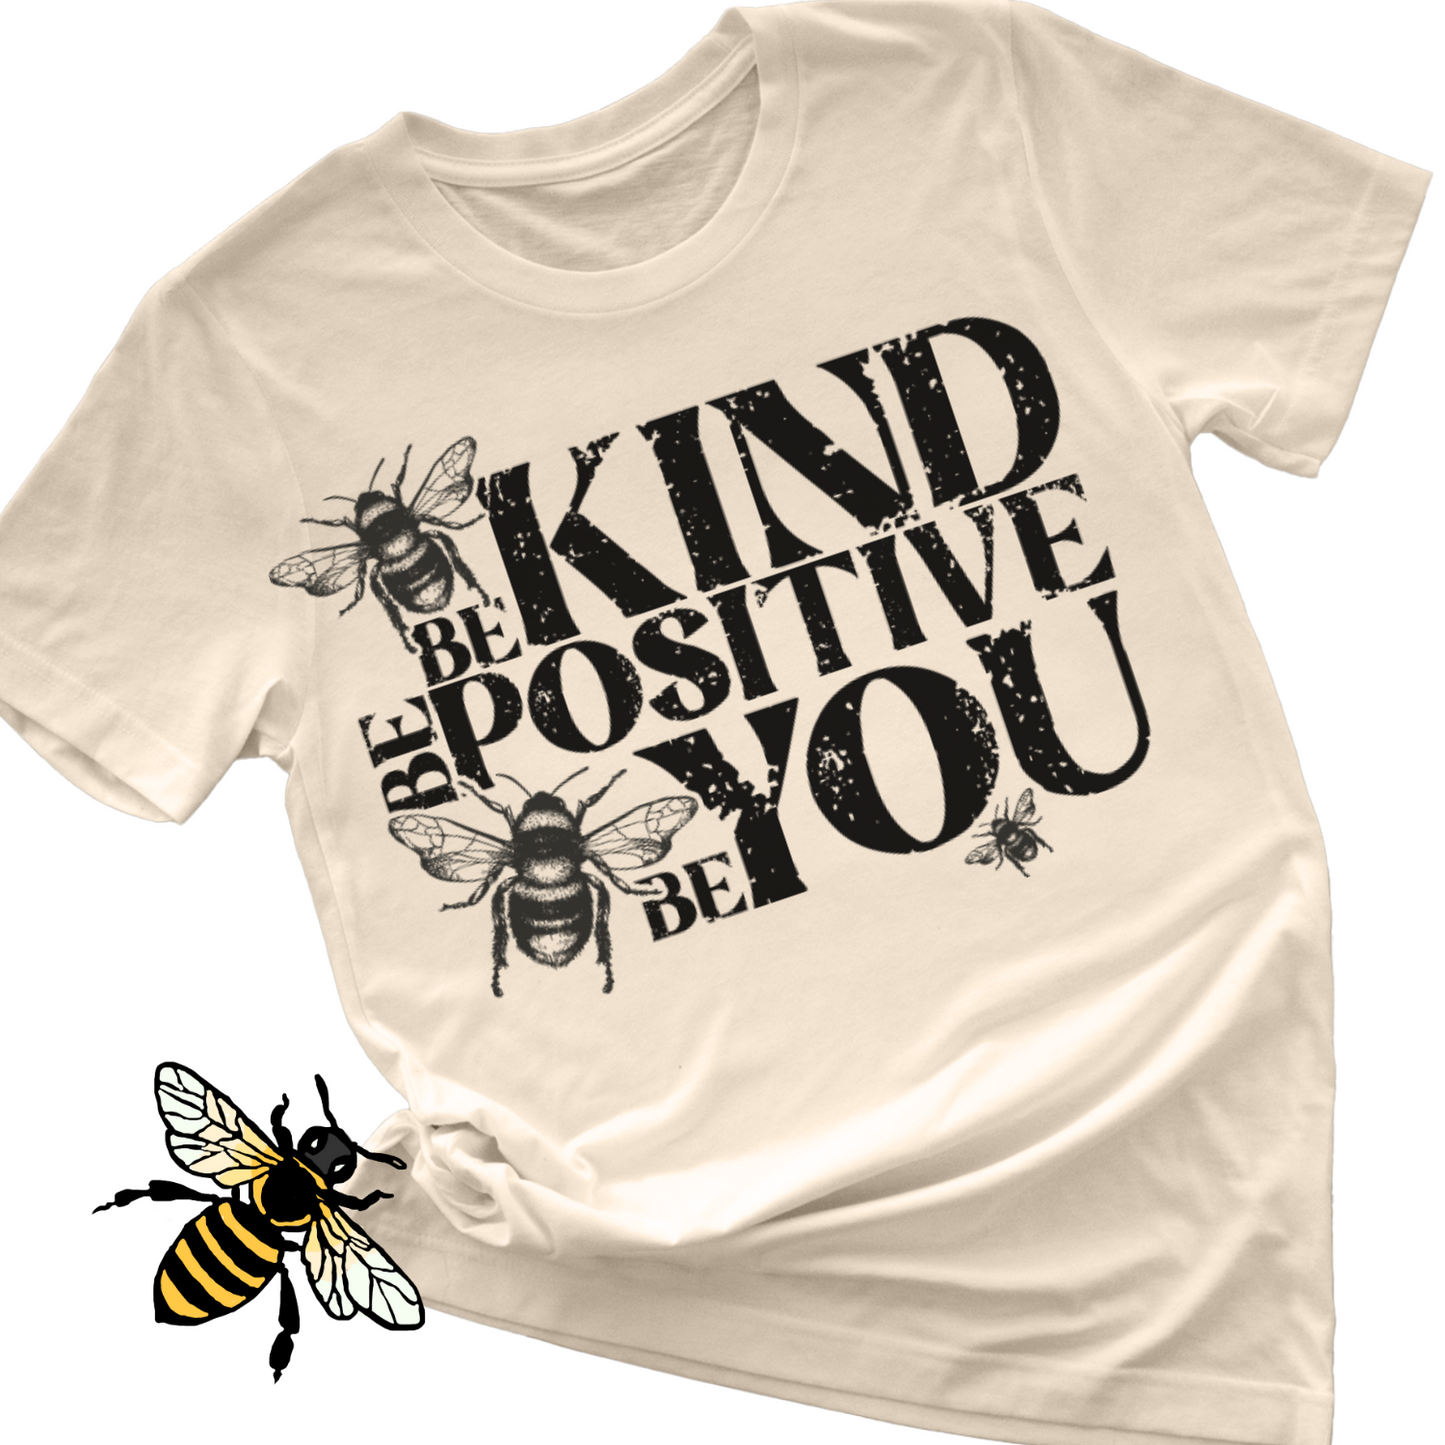 Be kind be positive be you tee